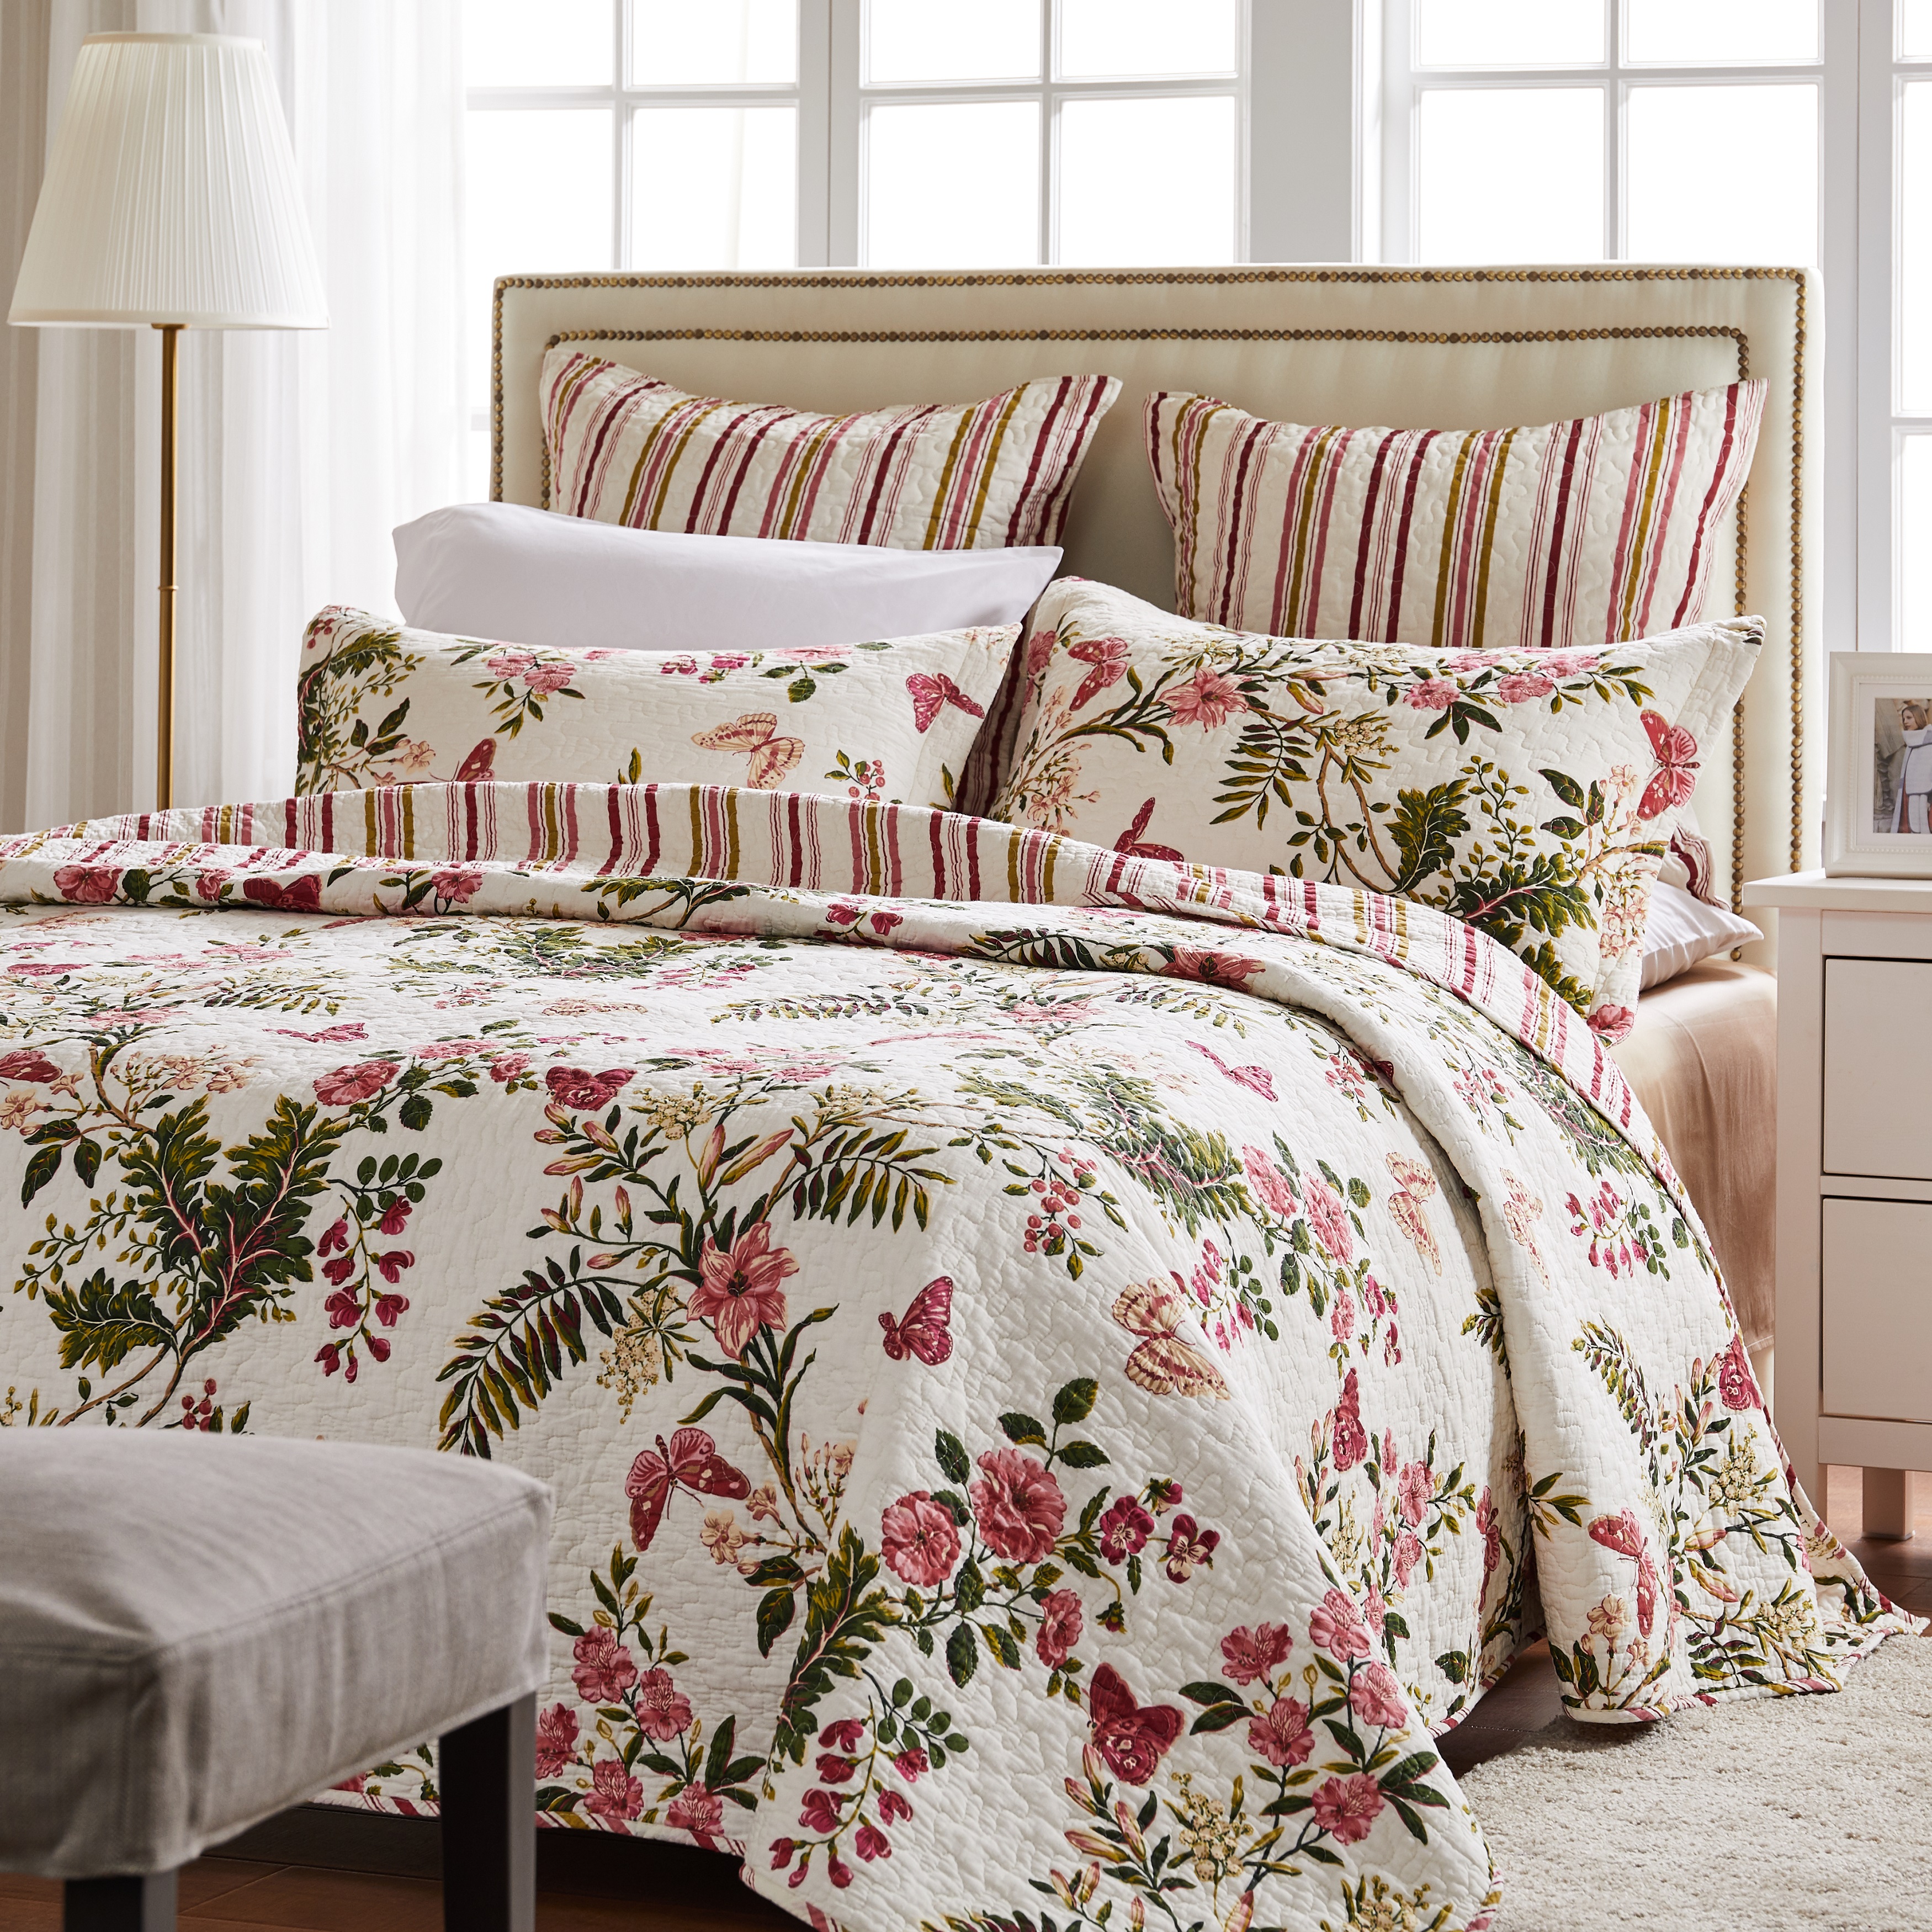 Greenland Home Butterflies 100% Cotton Reversible Oversized Botanical Quilt Set, 2-Piece Twin/Twin XL - image 5 of 5